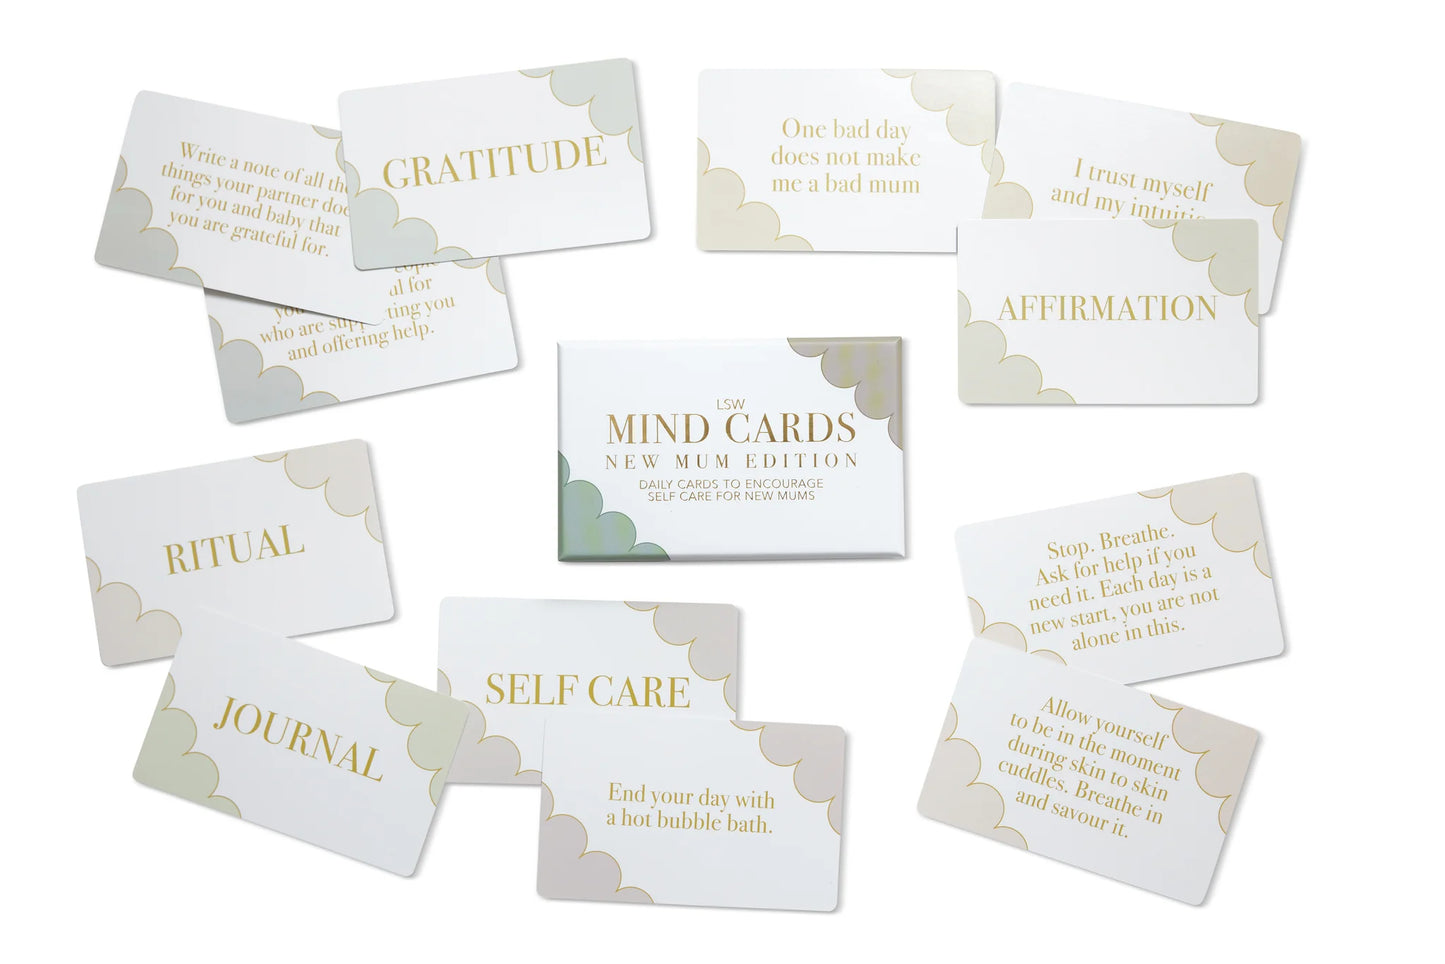 Wellbeing: LSW New Mum Self Love Mind Cards